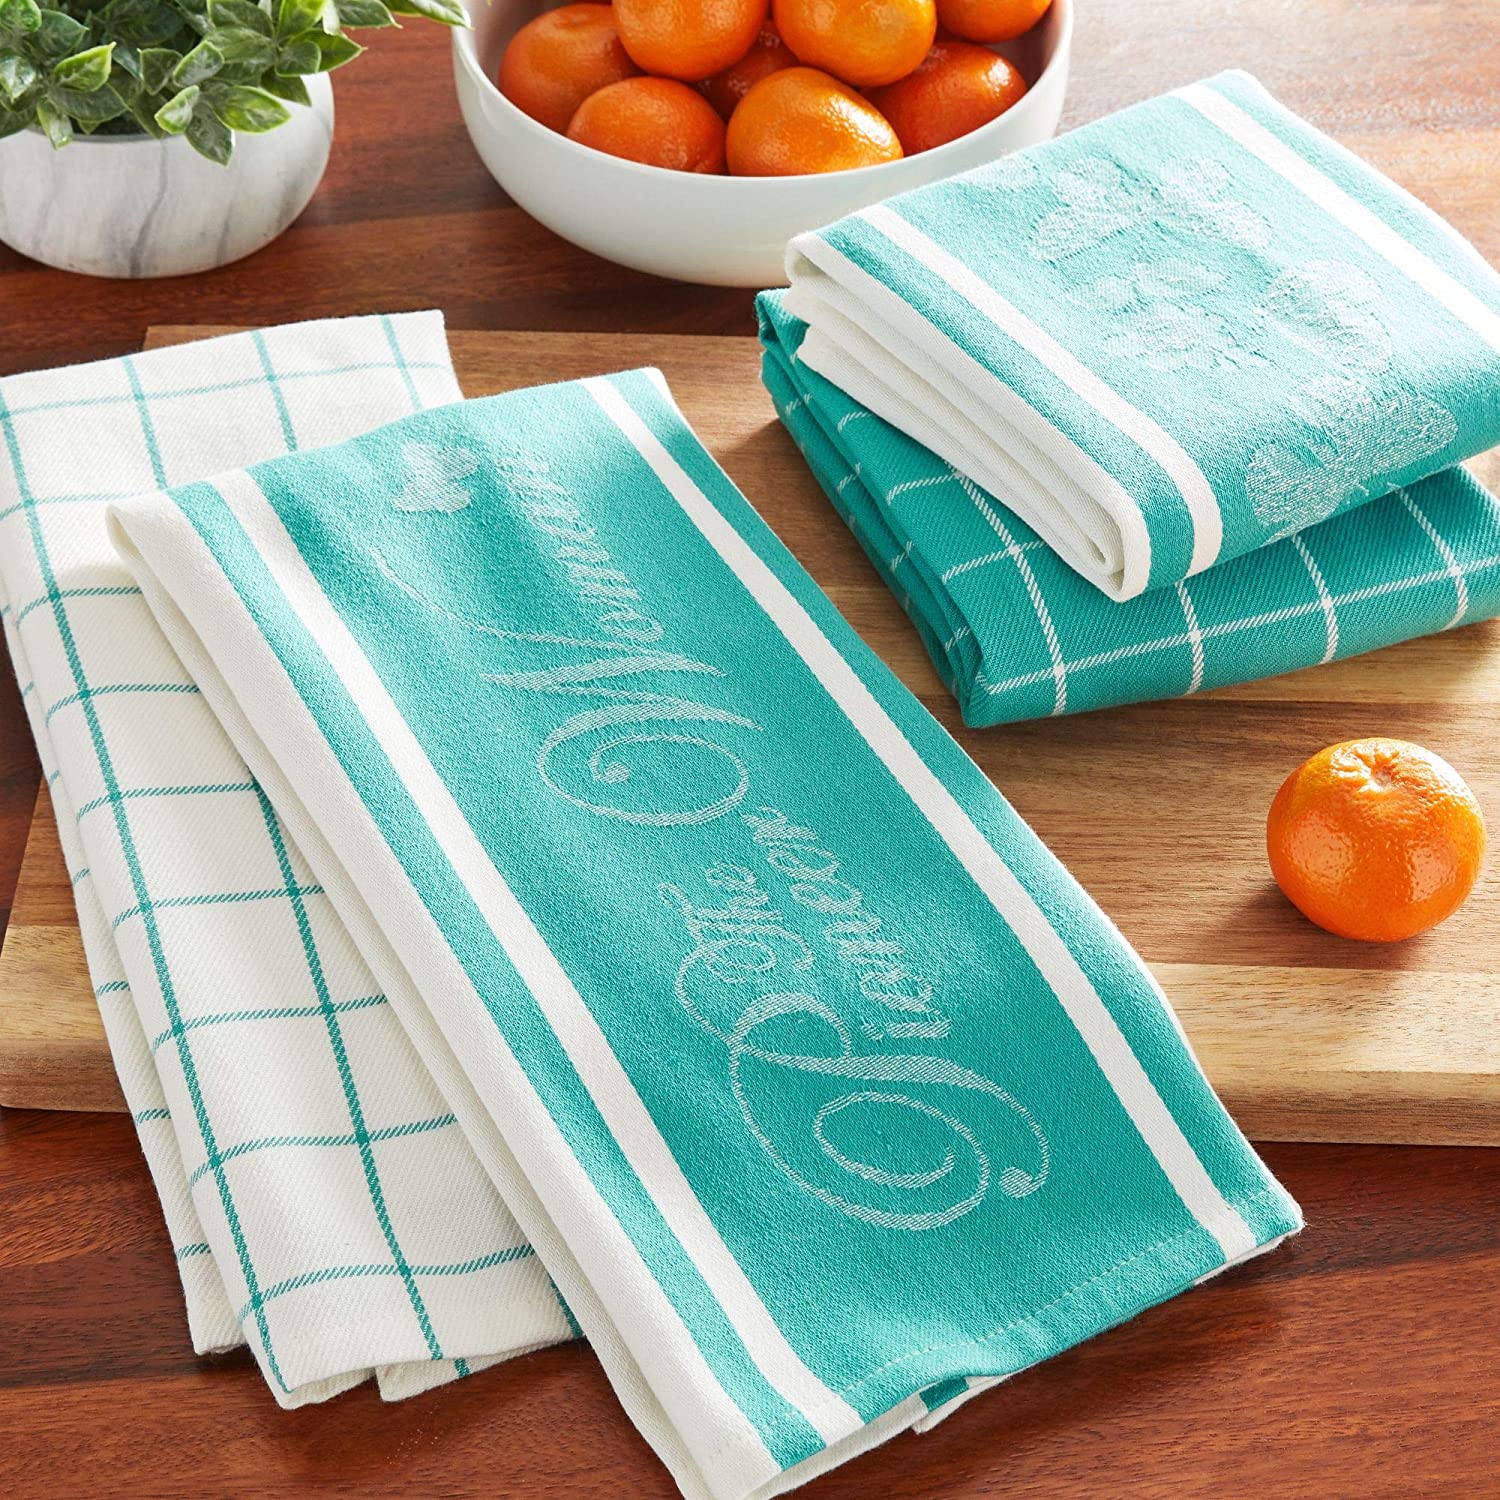 Pioneer Woman Butterfly Kitchen Tea Towels Set of 4 Assorted Teal